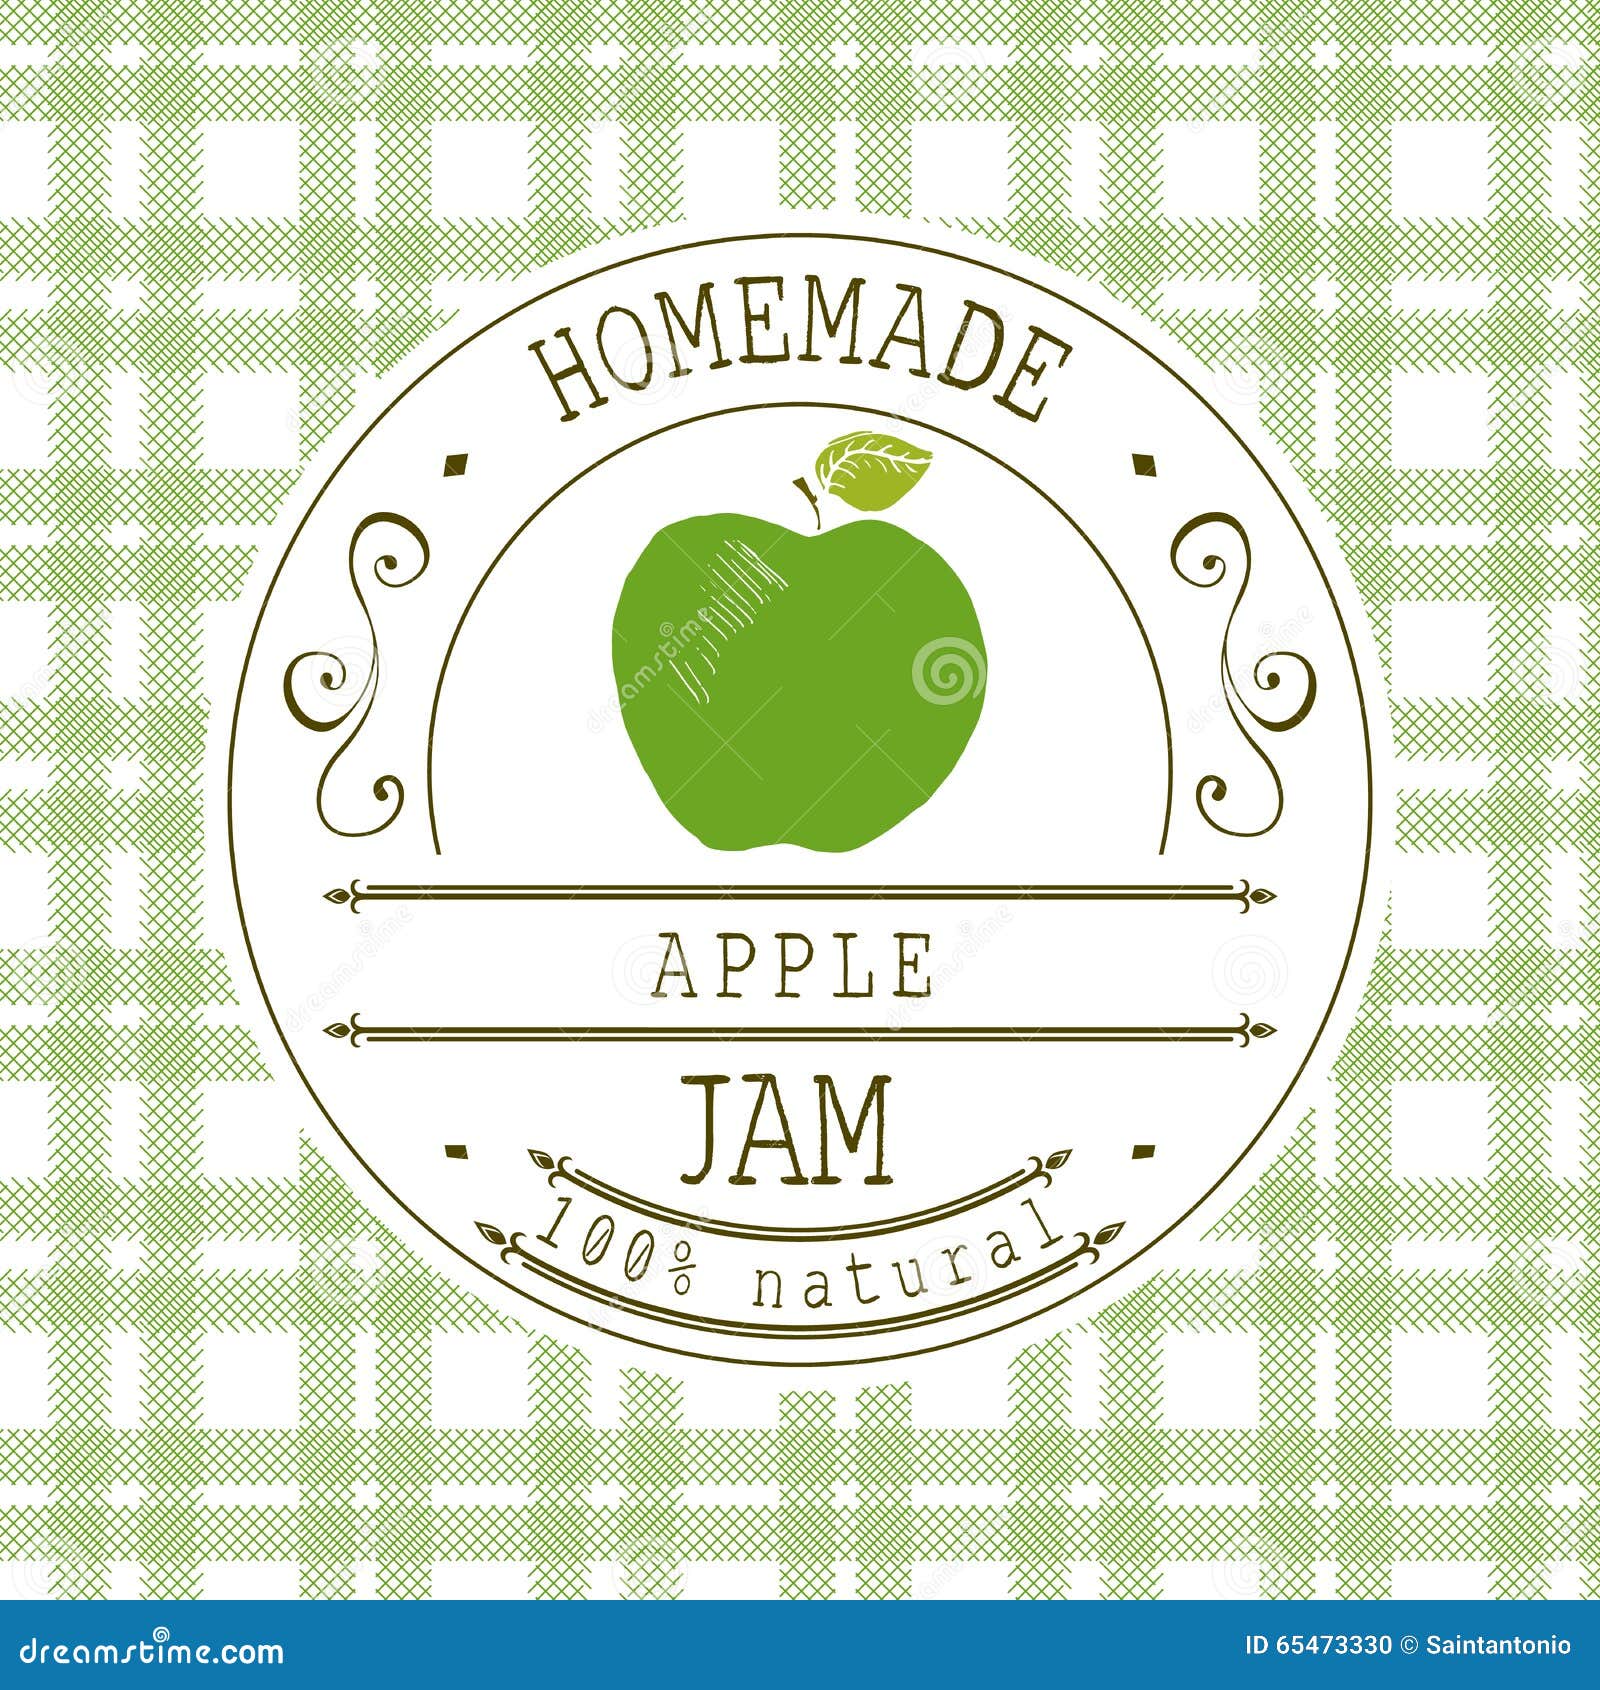 Jam Label Design Template. For Apple Dessert Product With 